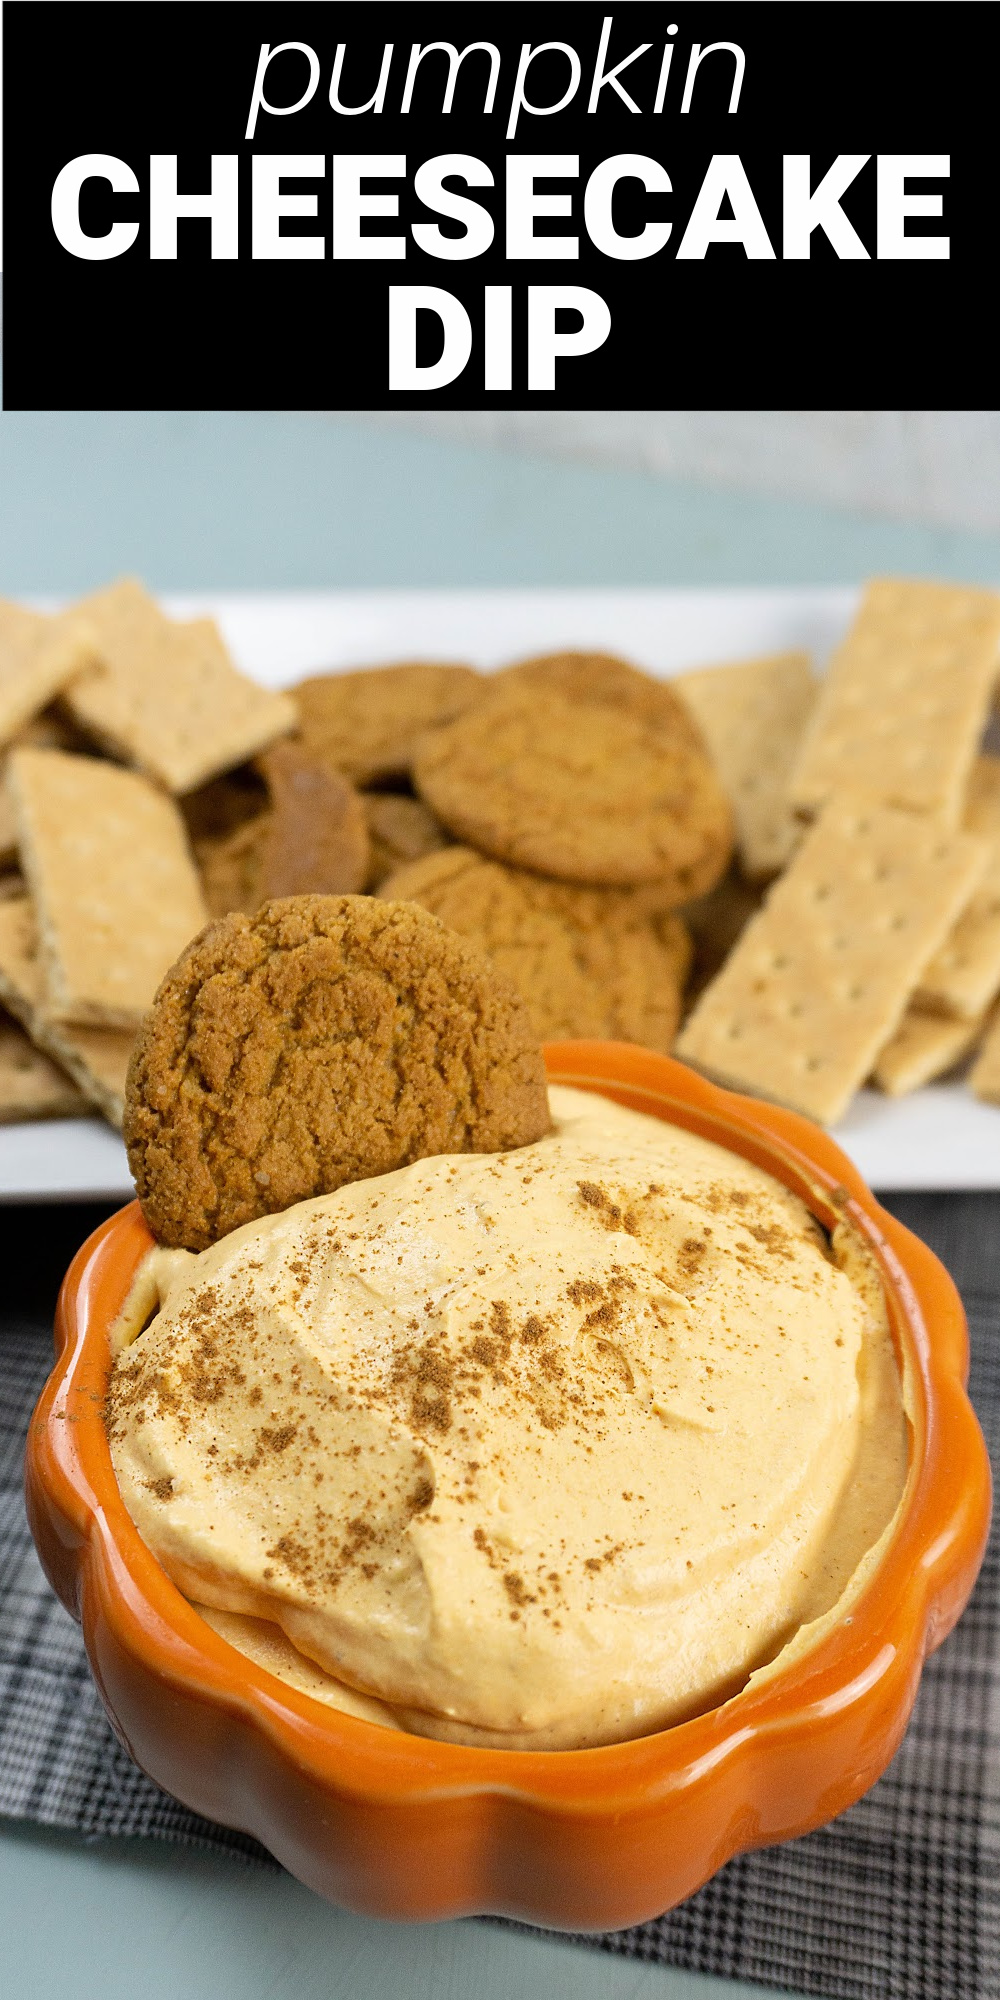 This easy Pumpkin Cheesecake Dip is a creamy snack full of everyone's favorite fall flavors. Made with just 4 ingredients it can be a sweet appetizer or fun dessert.